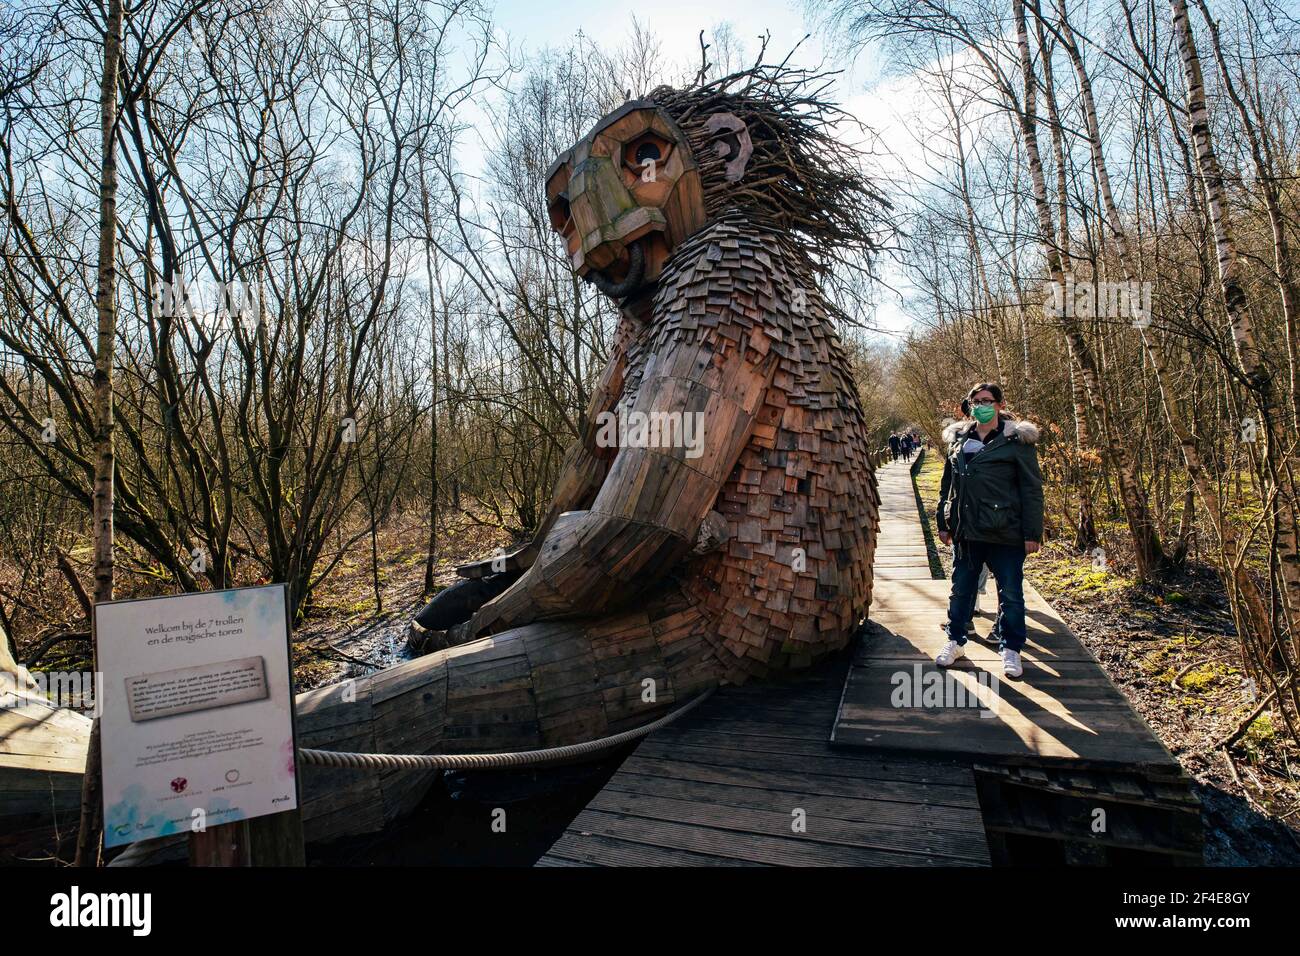 (210321) -- BOOM, March 21, 2021 (Xinhua) -- People view a 'troll' at the De Schorre forest park in Boom, Belgium, March 20, 2021. Danish artist Thomas Dambo and his team built seven giant 'trolls' from reclaimed wood at the De Schorre forest park in northern Belgium in 2019. These giant wooden sculptures are dotted around the forest. The United Nations General Assembly proclaimed March 21 as the International Day of Forests which celebrates and creates awareness on the importance of all types of forests and on the need to preserve and care for the world's woodlands. This year the theme f Stock Photo